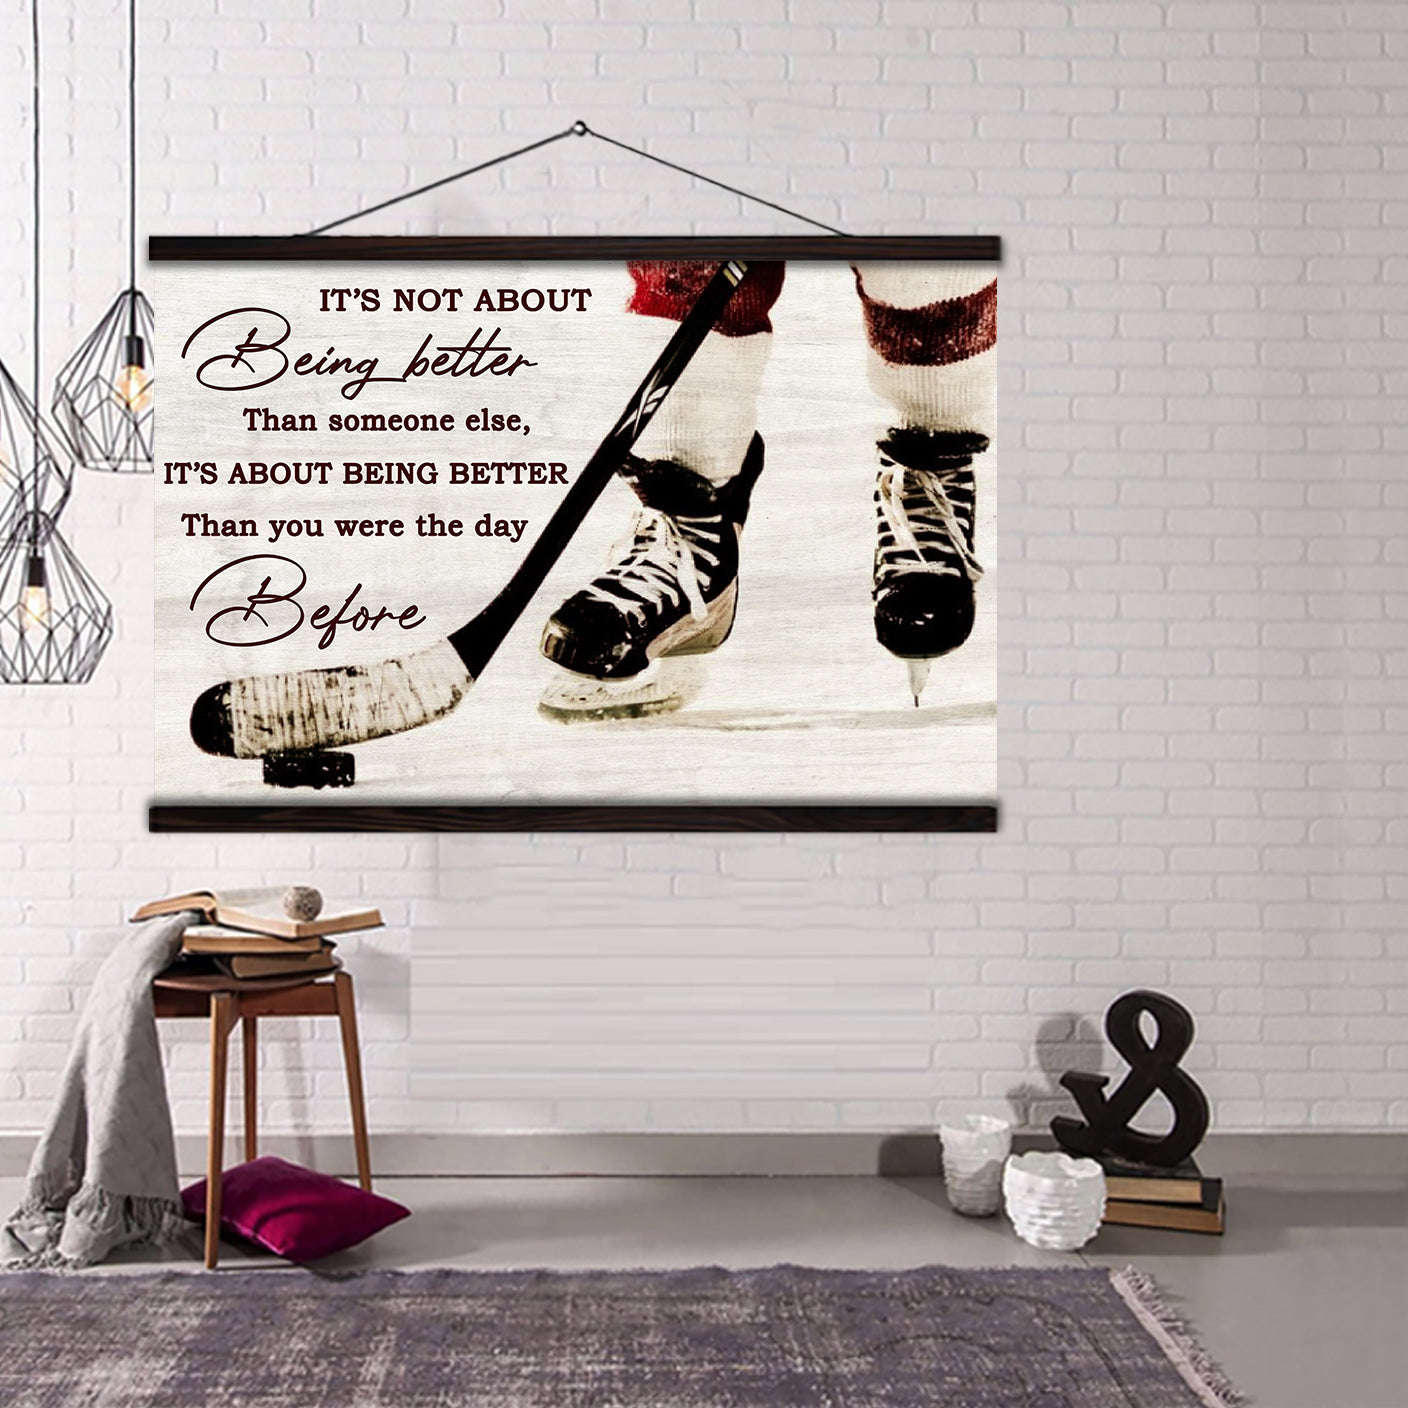 Customizable hockey poster - It is not about better than someone else, It is about being better than you were the day before